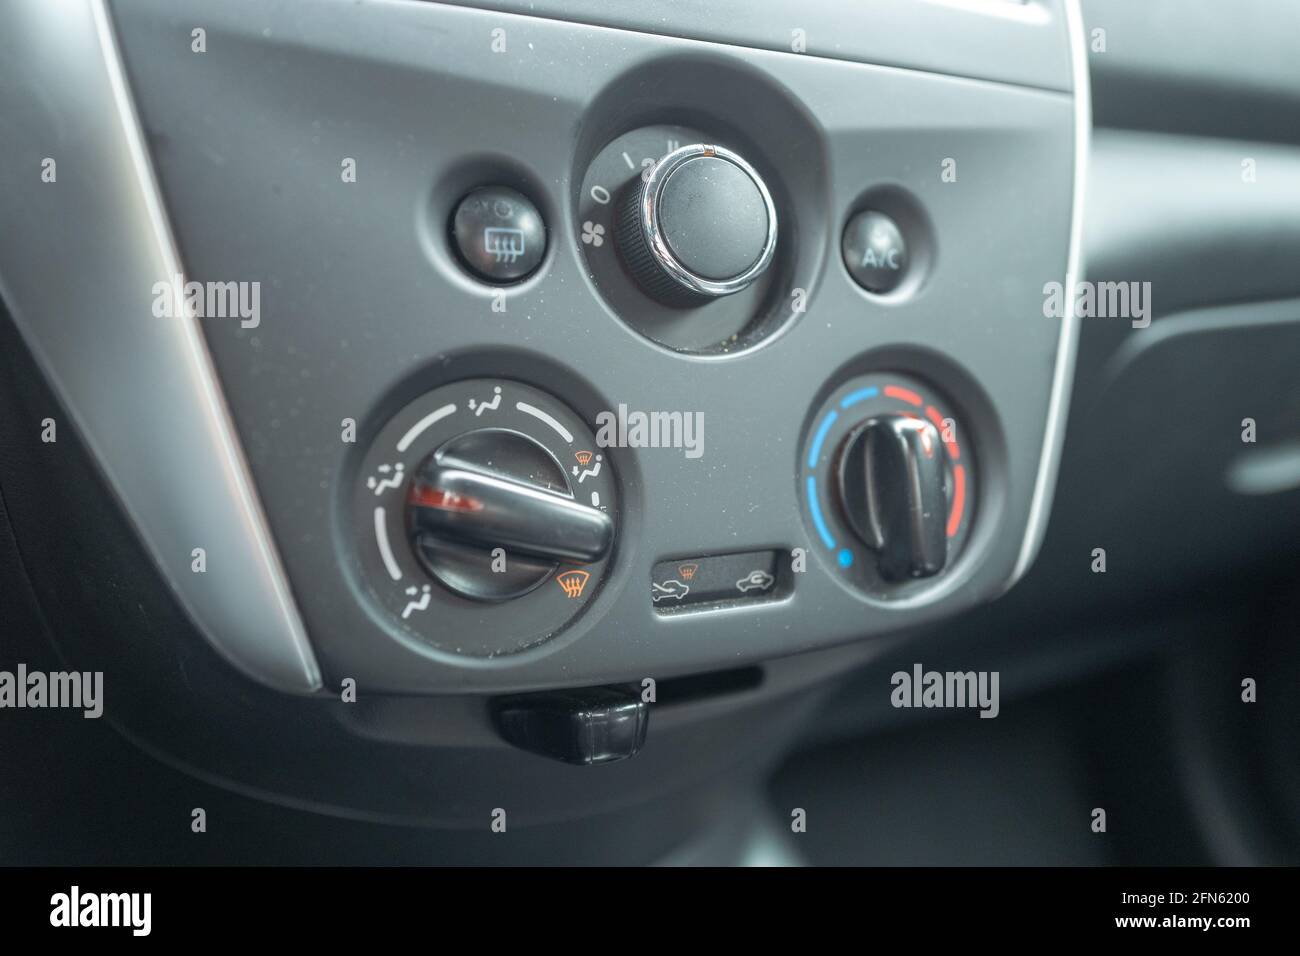 Knobs of automobile climate control system on center console of Nissan automobile, Walnut Creek, California, November 13, 2020. () Stock Photo